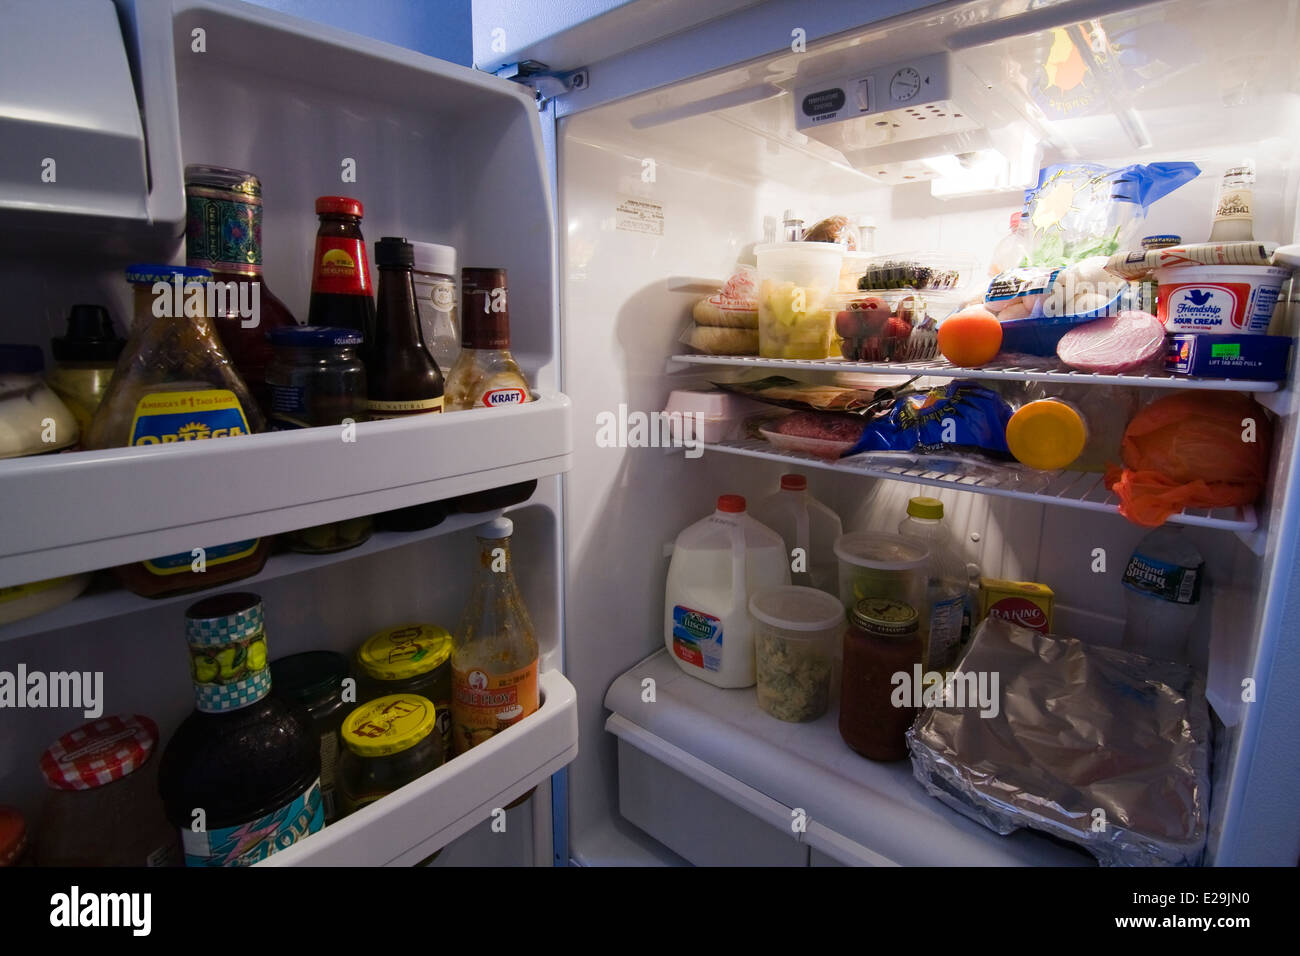 Door to a Refrigerator open with light on showing contents Stock Photo